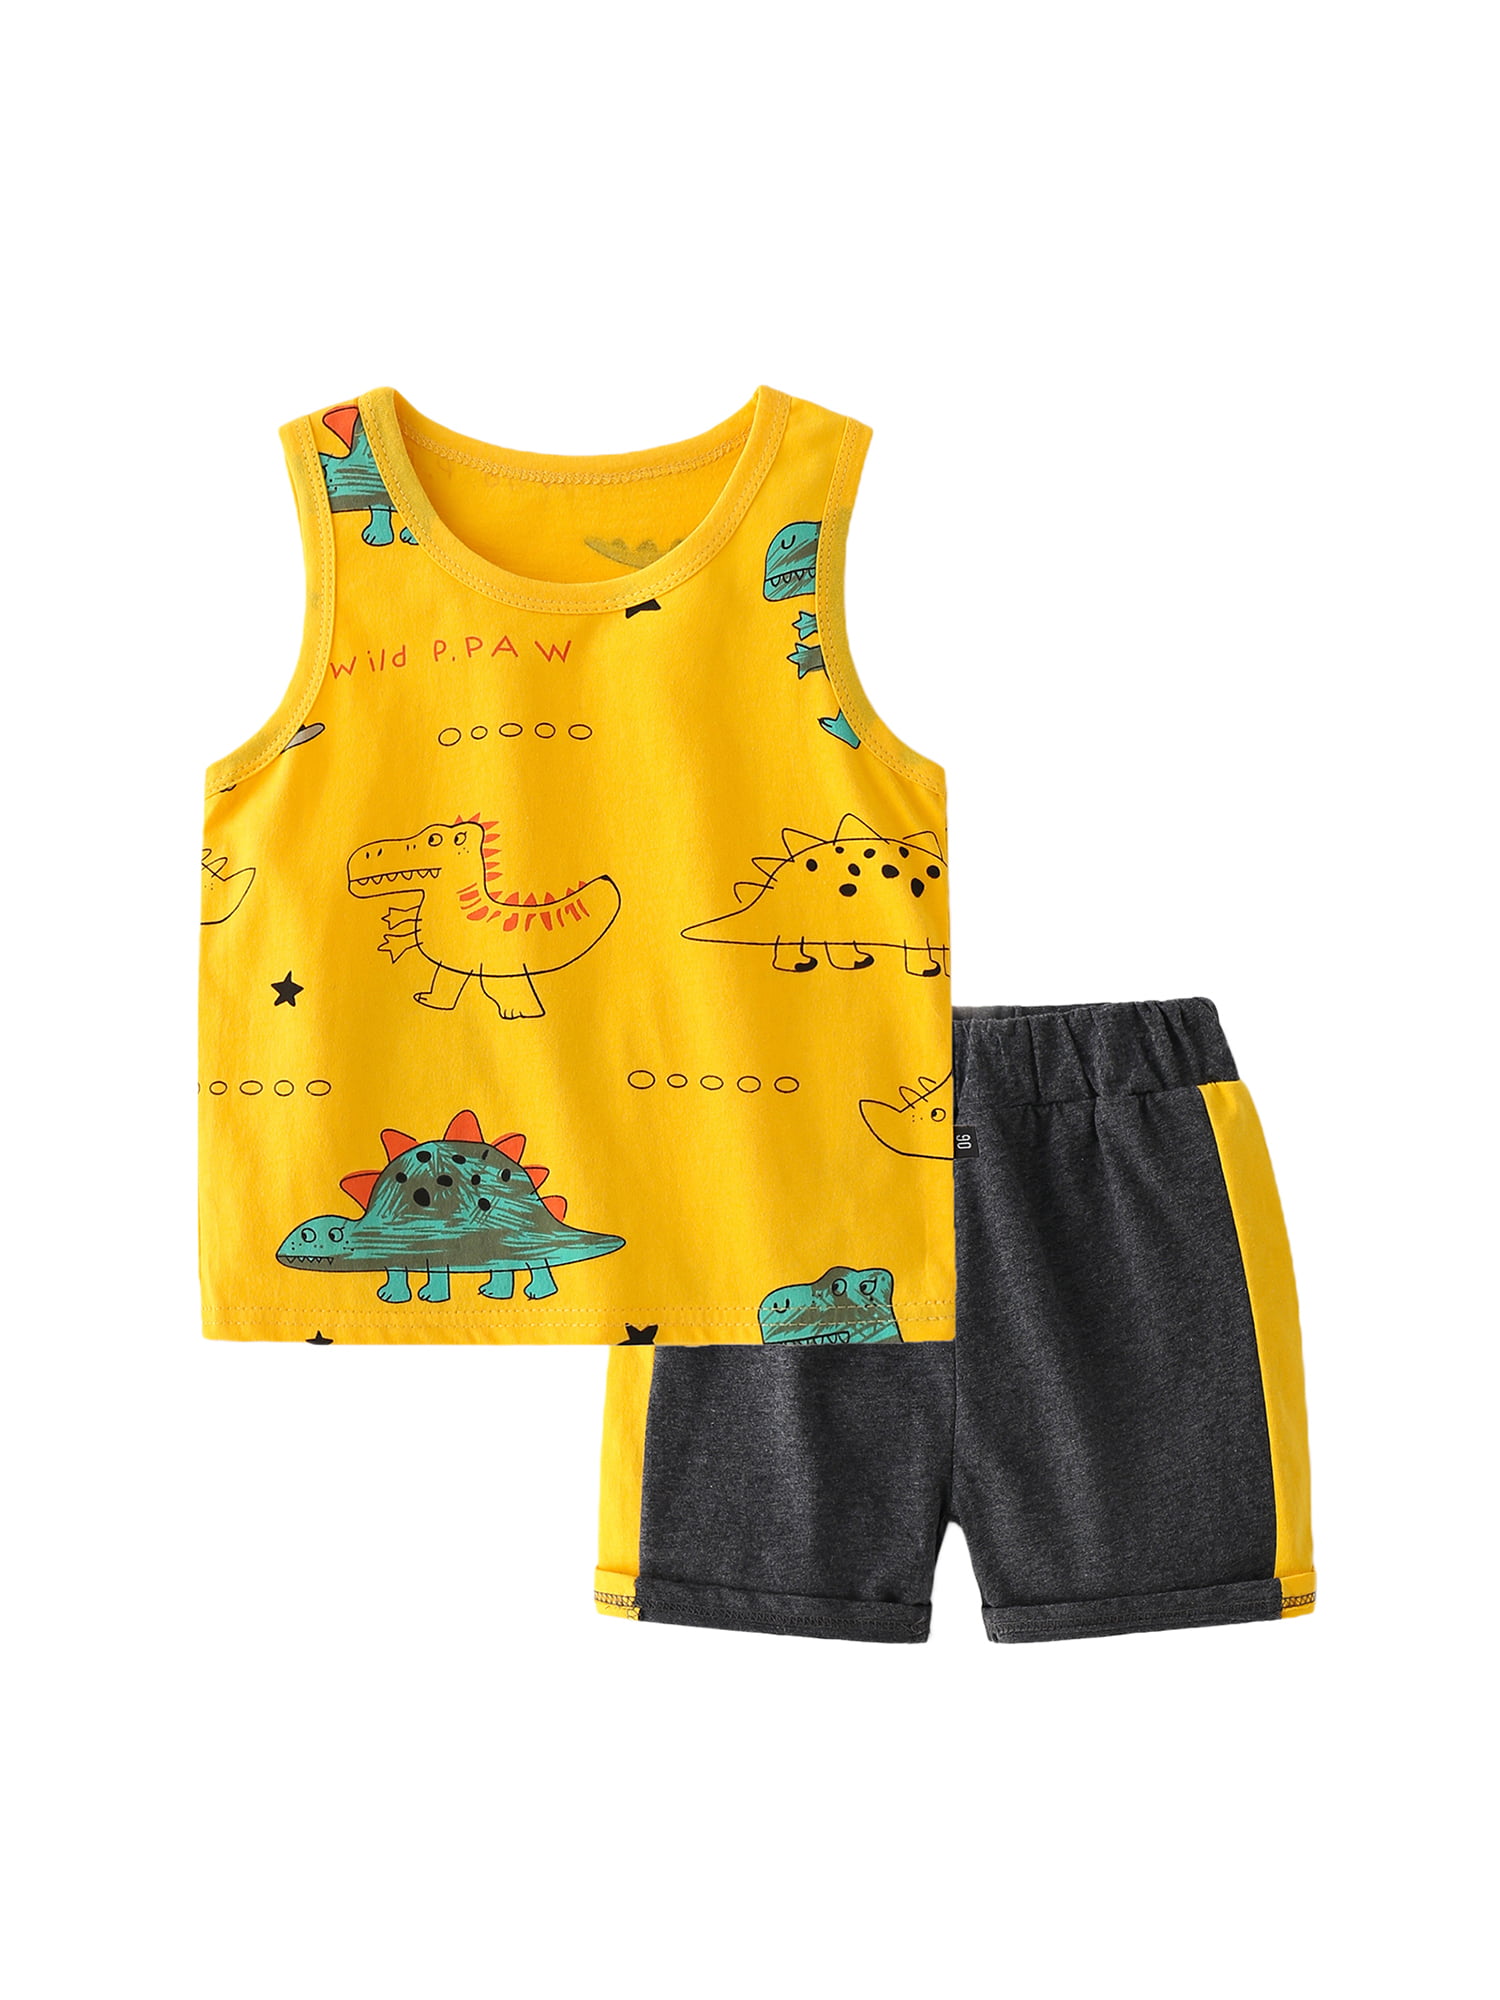 Baby Boys Outfits Clothes Dinosuar Sleeveless Tops Vest Shorts Set Toddler Kids 